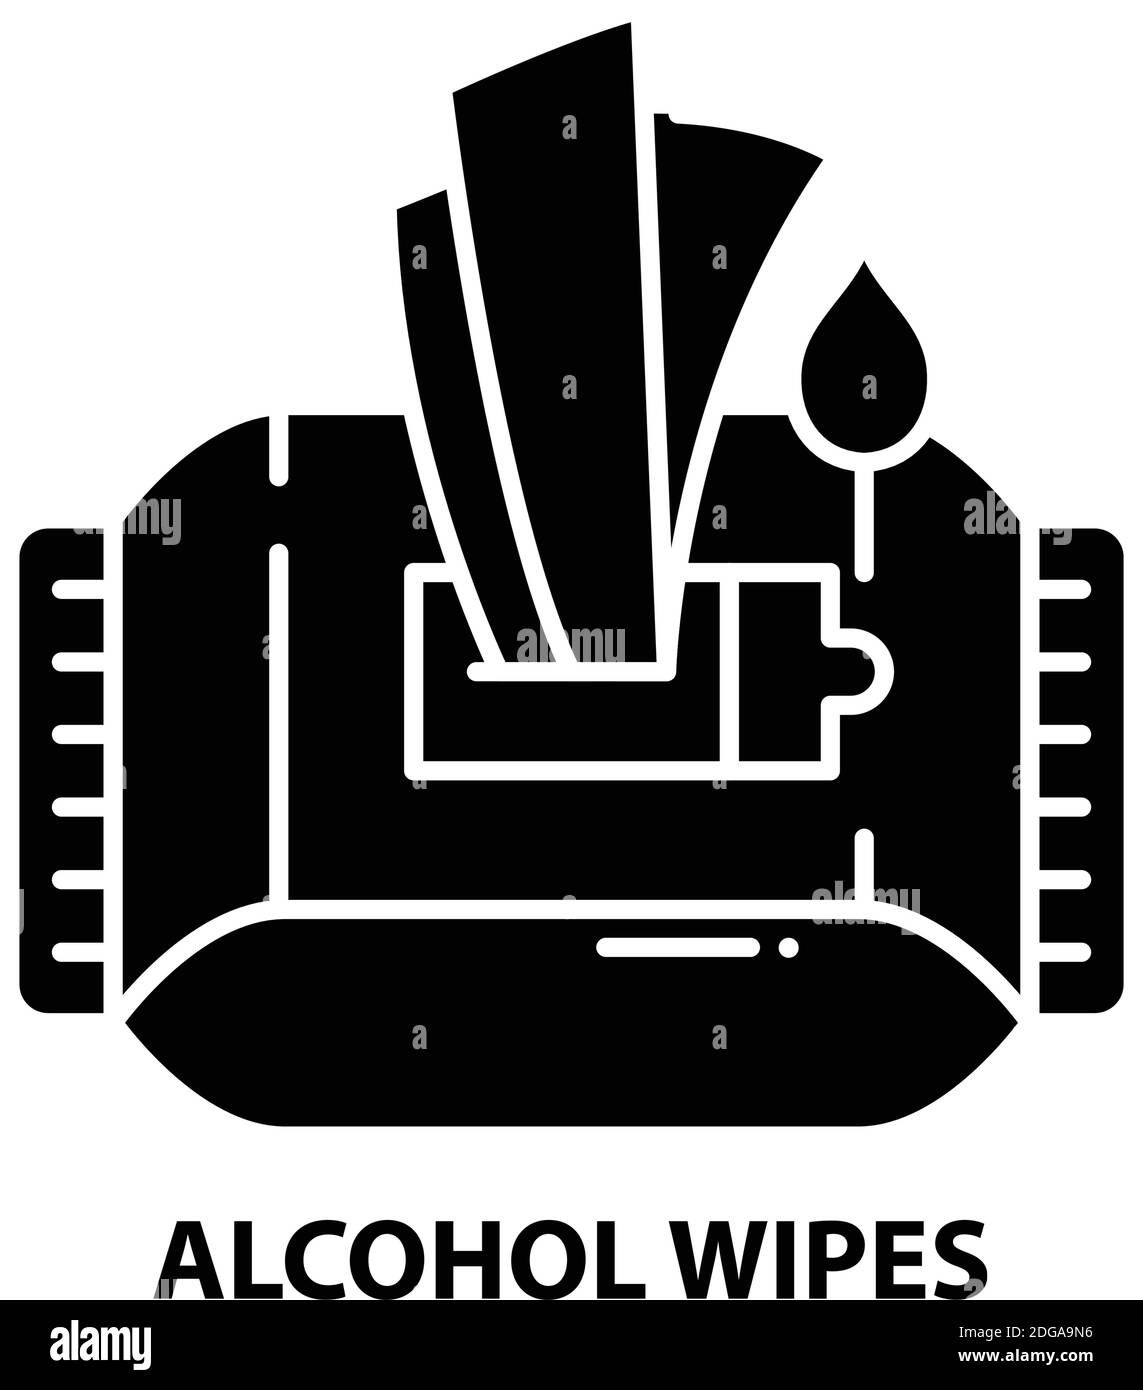 alcohol wipes icon, black vector sign with editable strokes, concept illustration Stock Vector